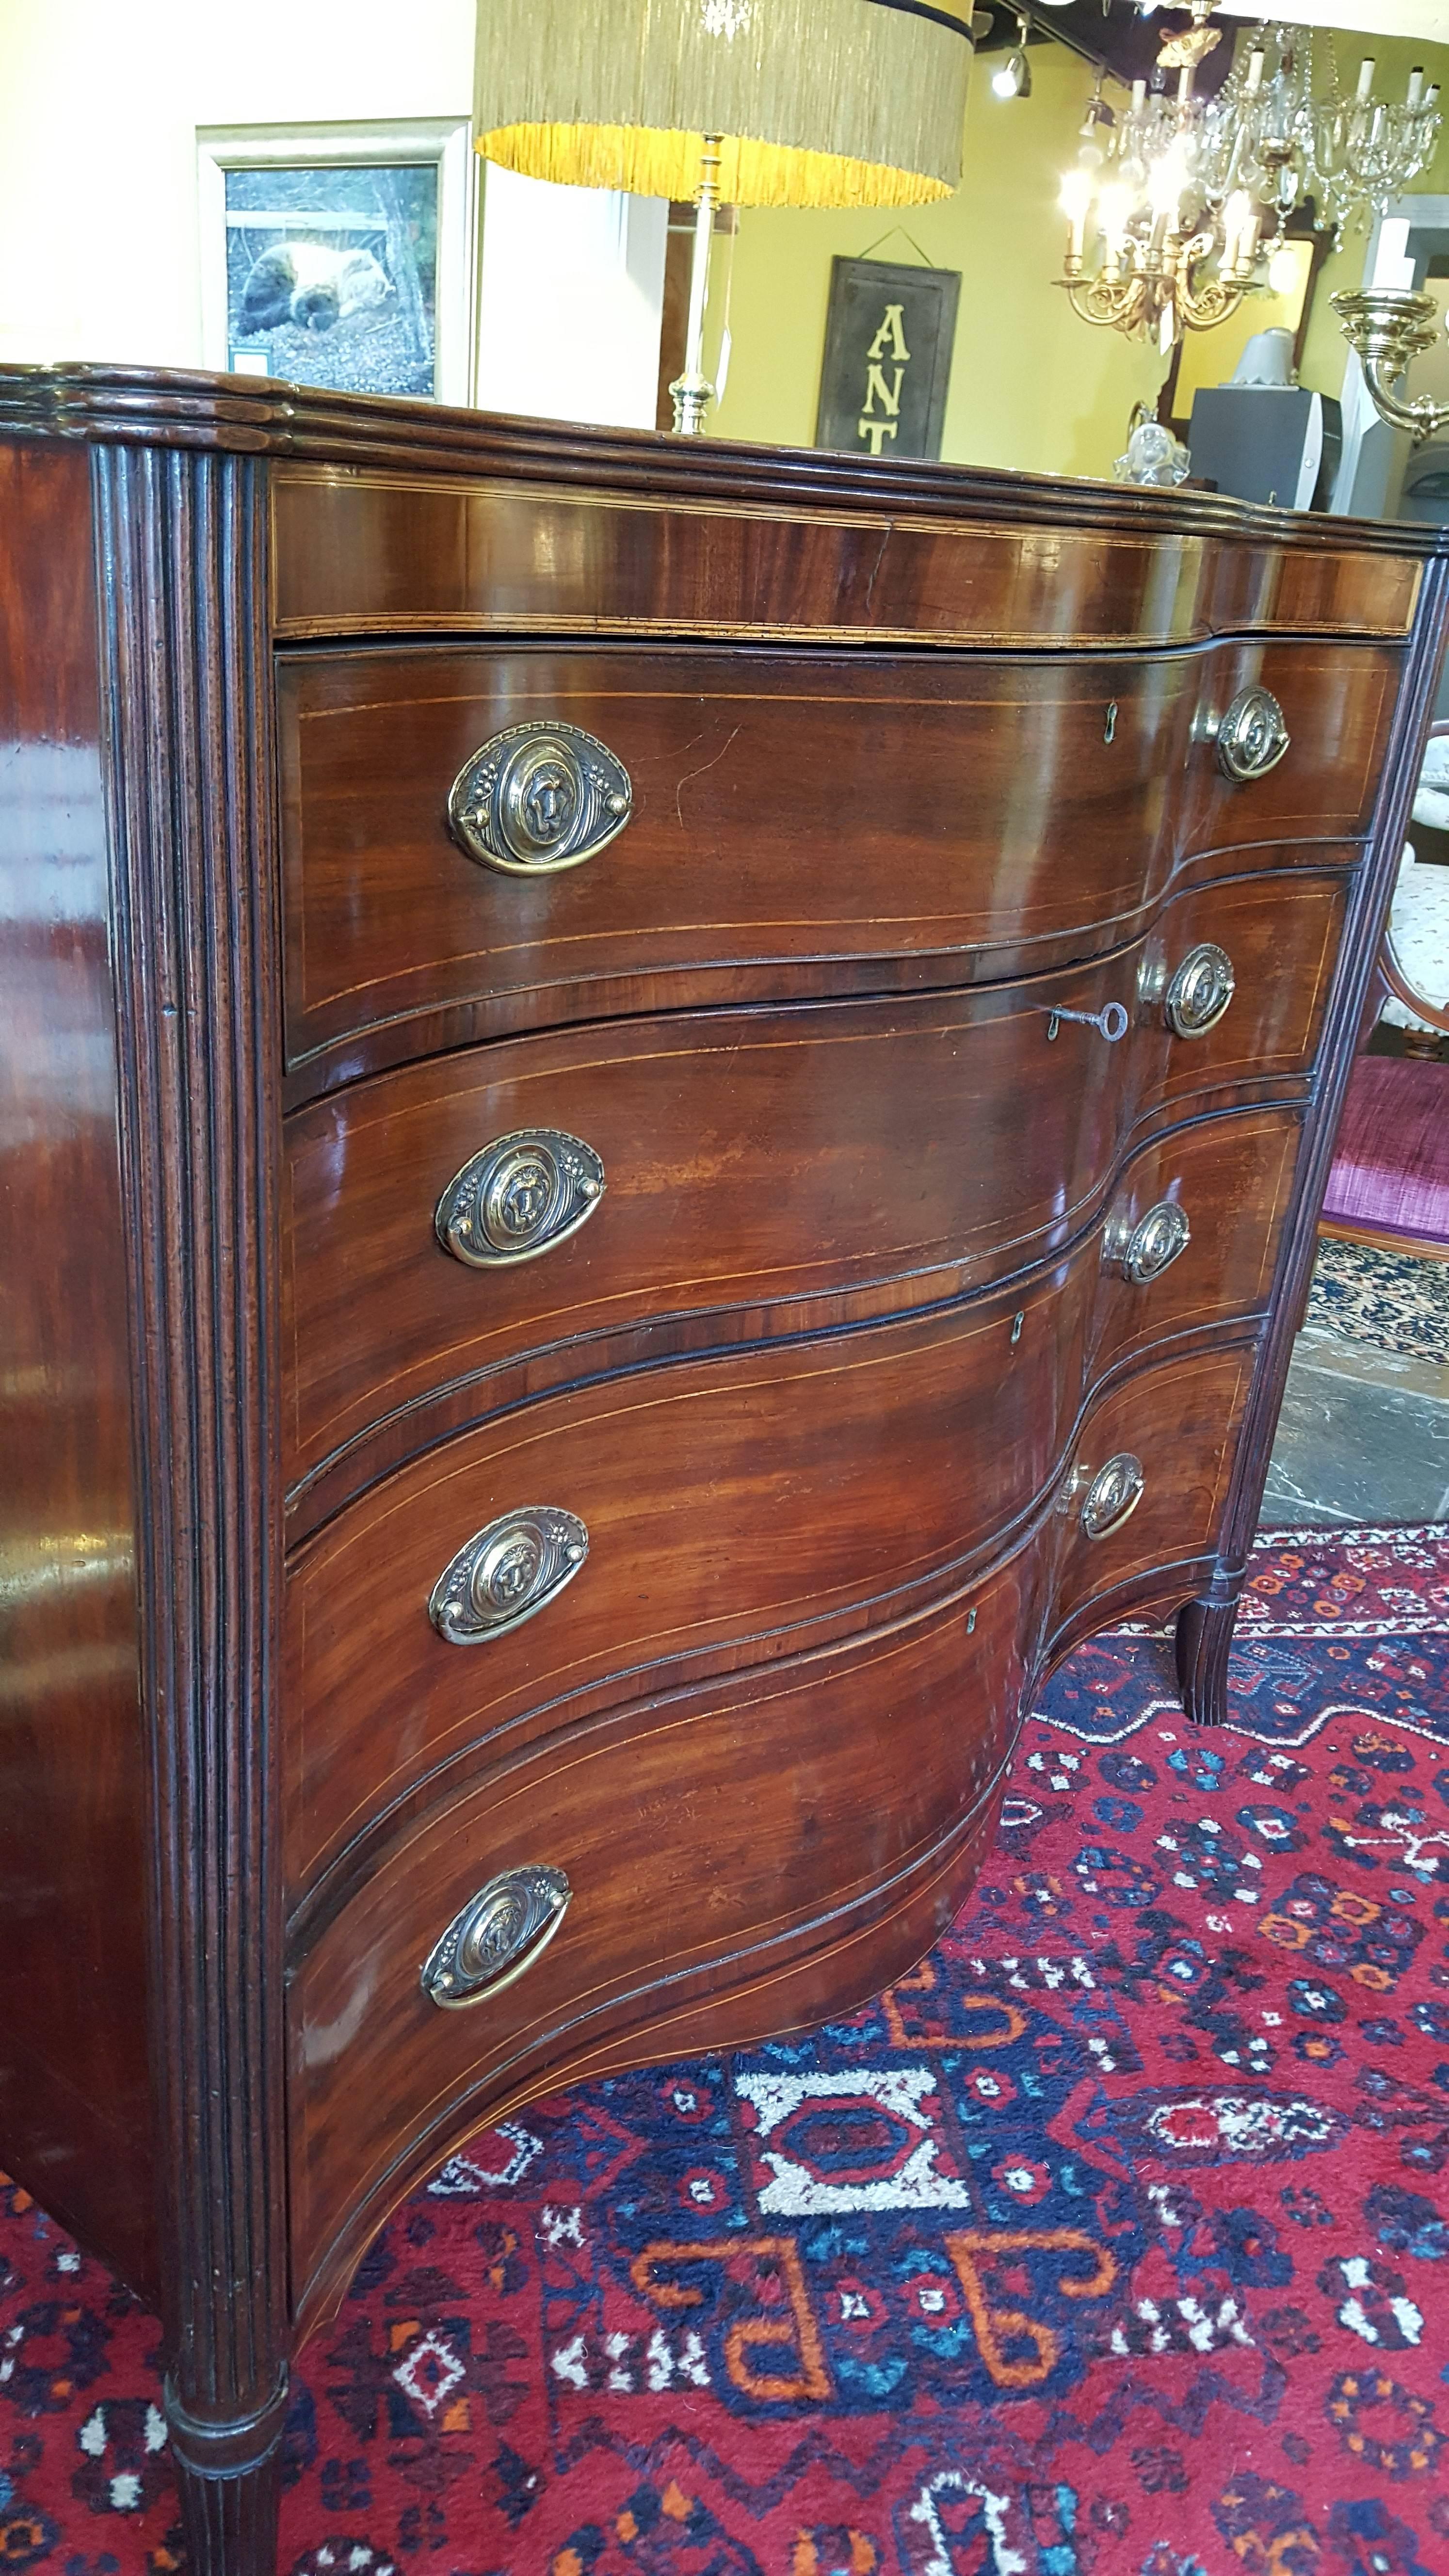 George III mahogany serpentine front and top chest of drawers with shaped apron and satinwood string inlay, lion mask handles, reeded columns leading to splayed feet, circa 1790. Measures: 48